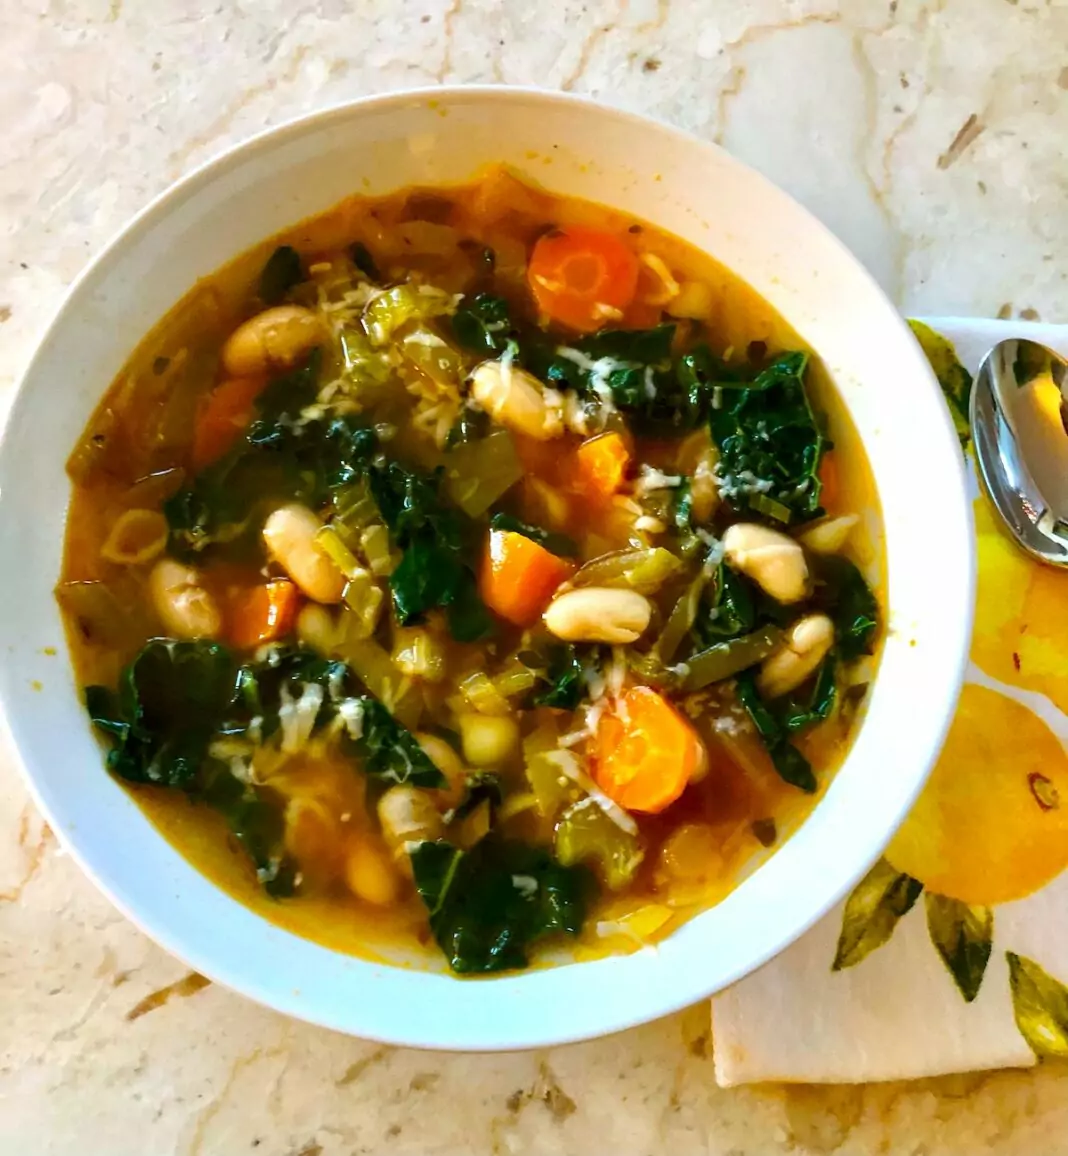 Bowl of soup with kale, carrots and white beans